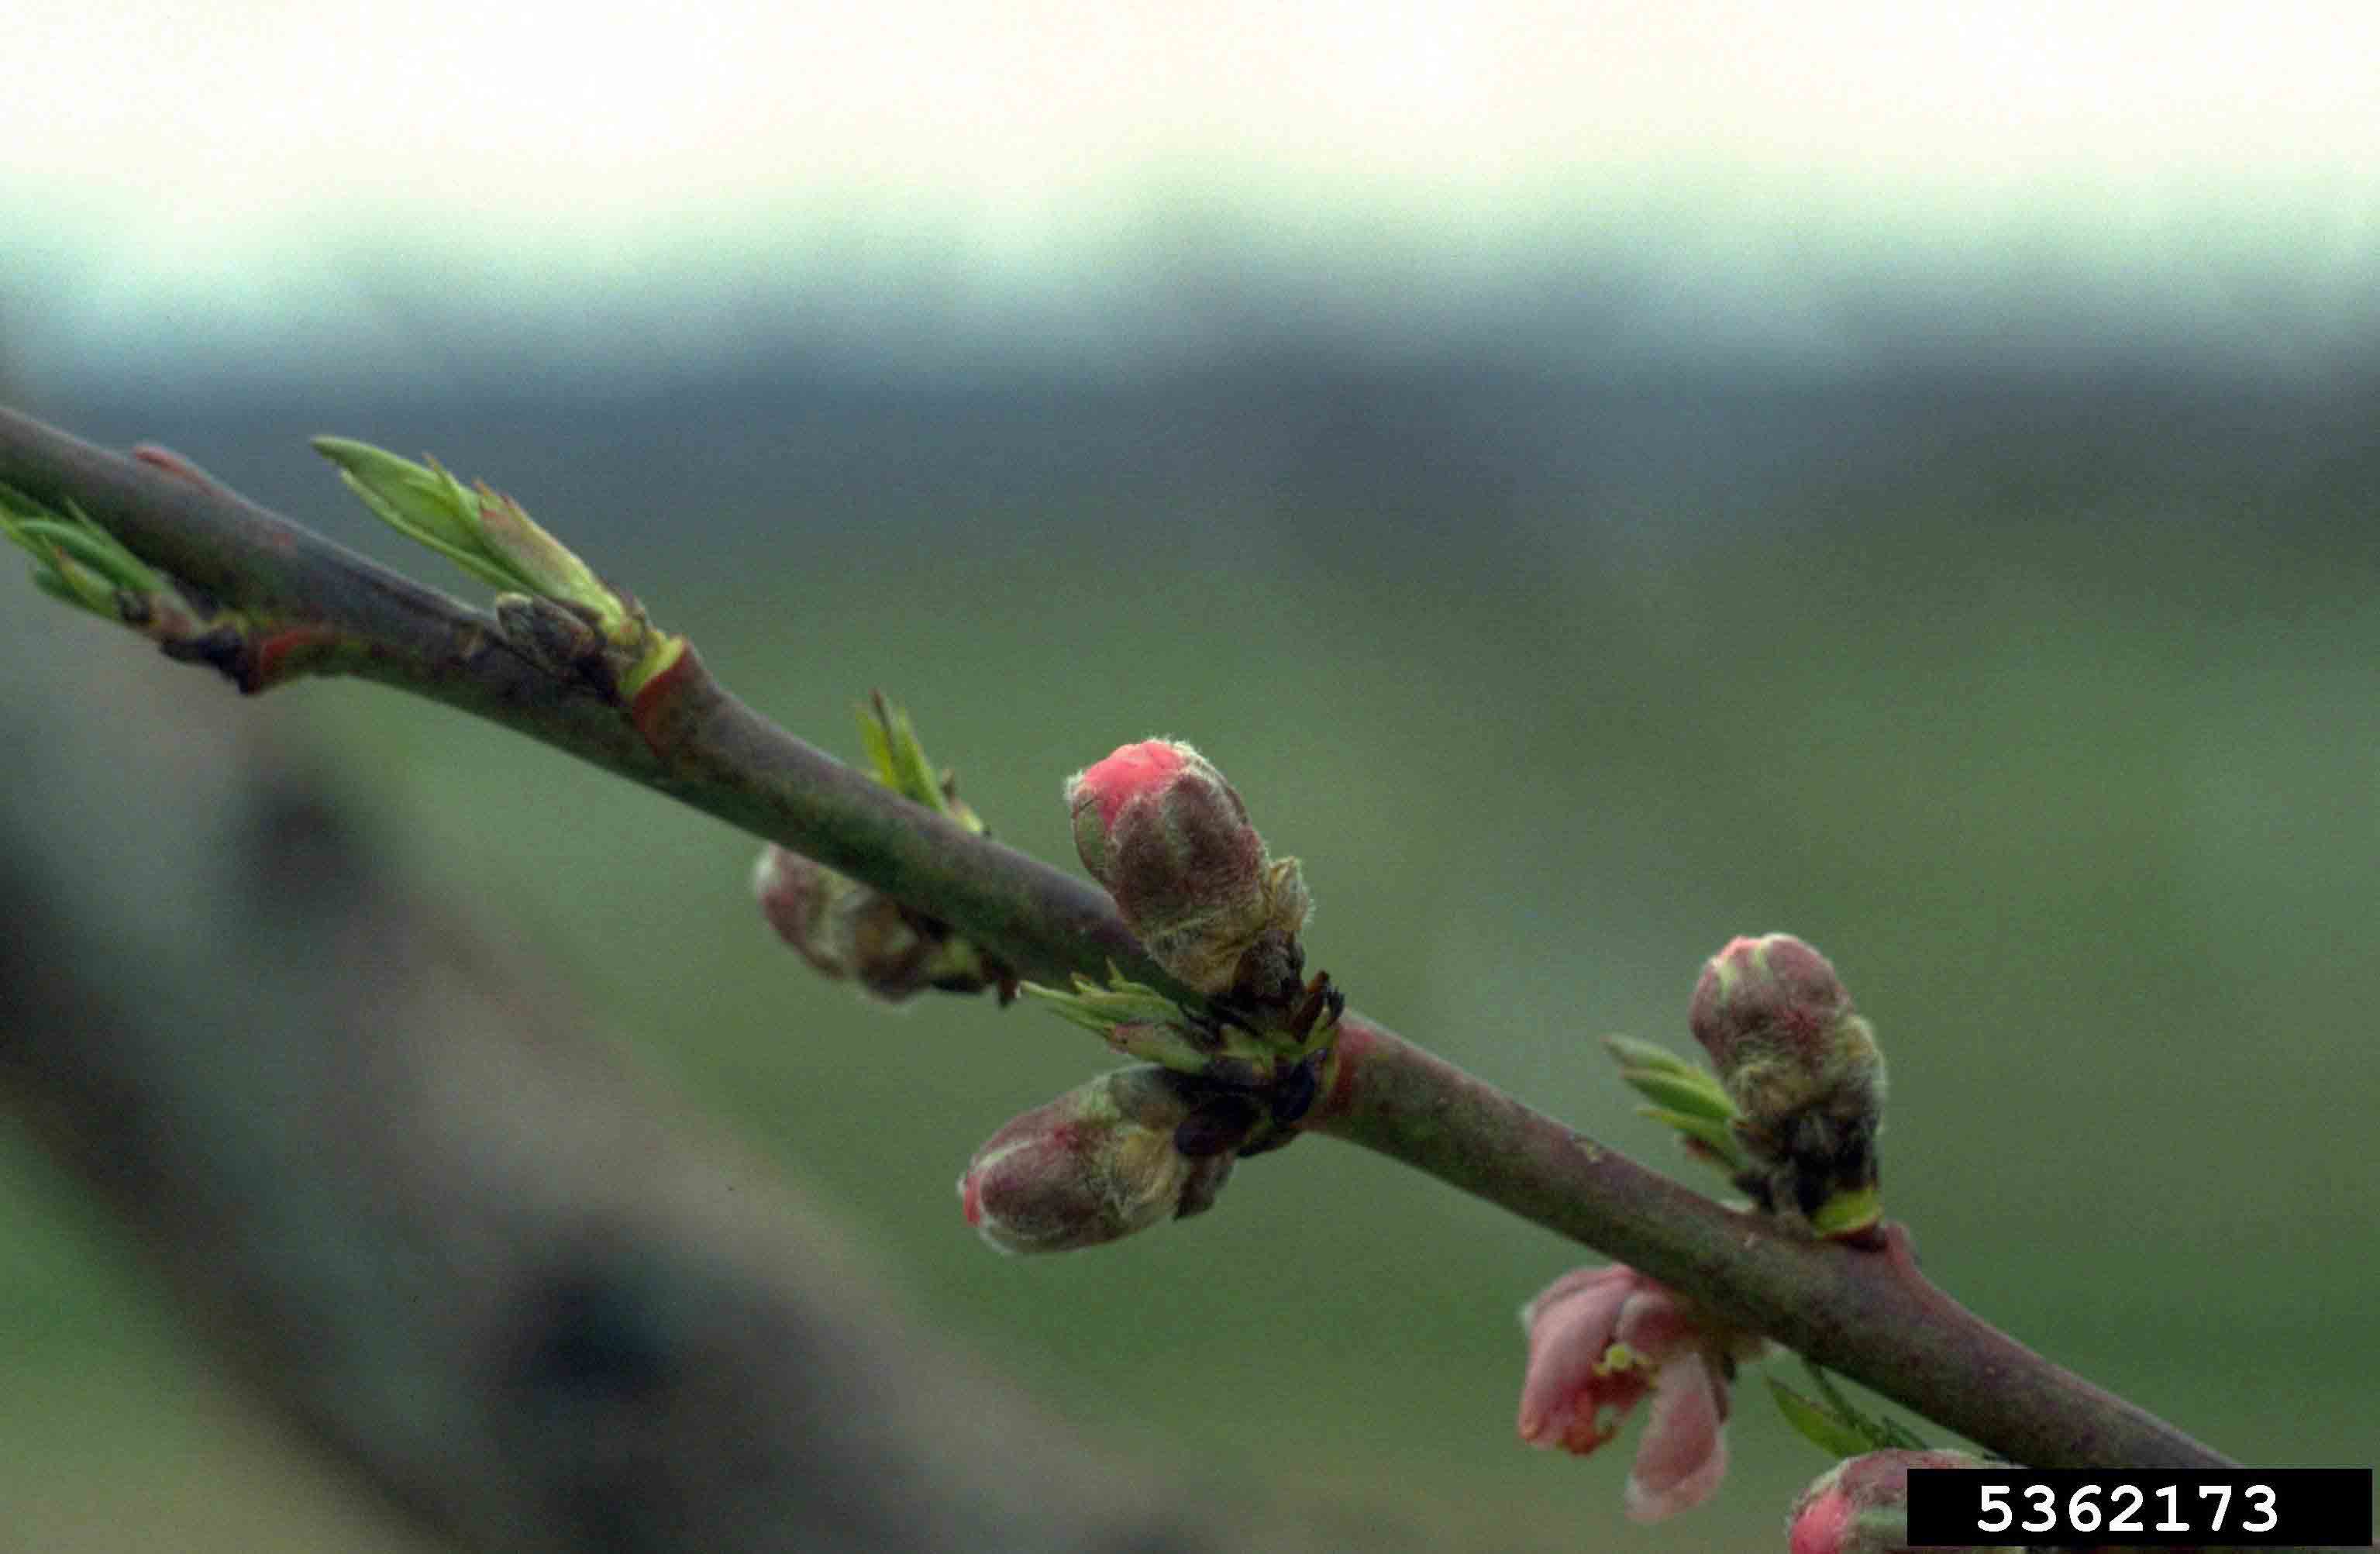 Peach flower buds and emerging leaves